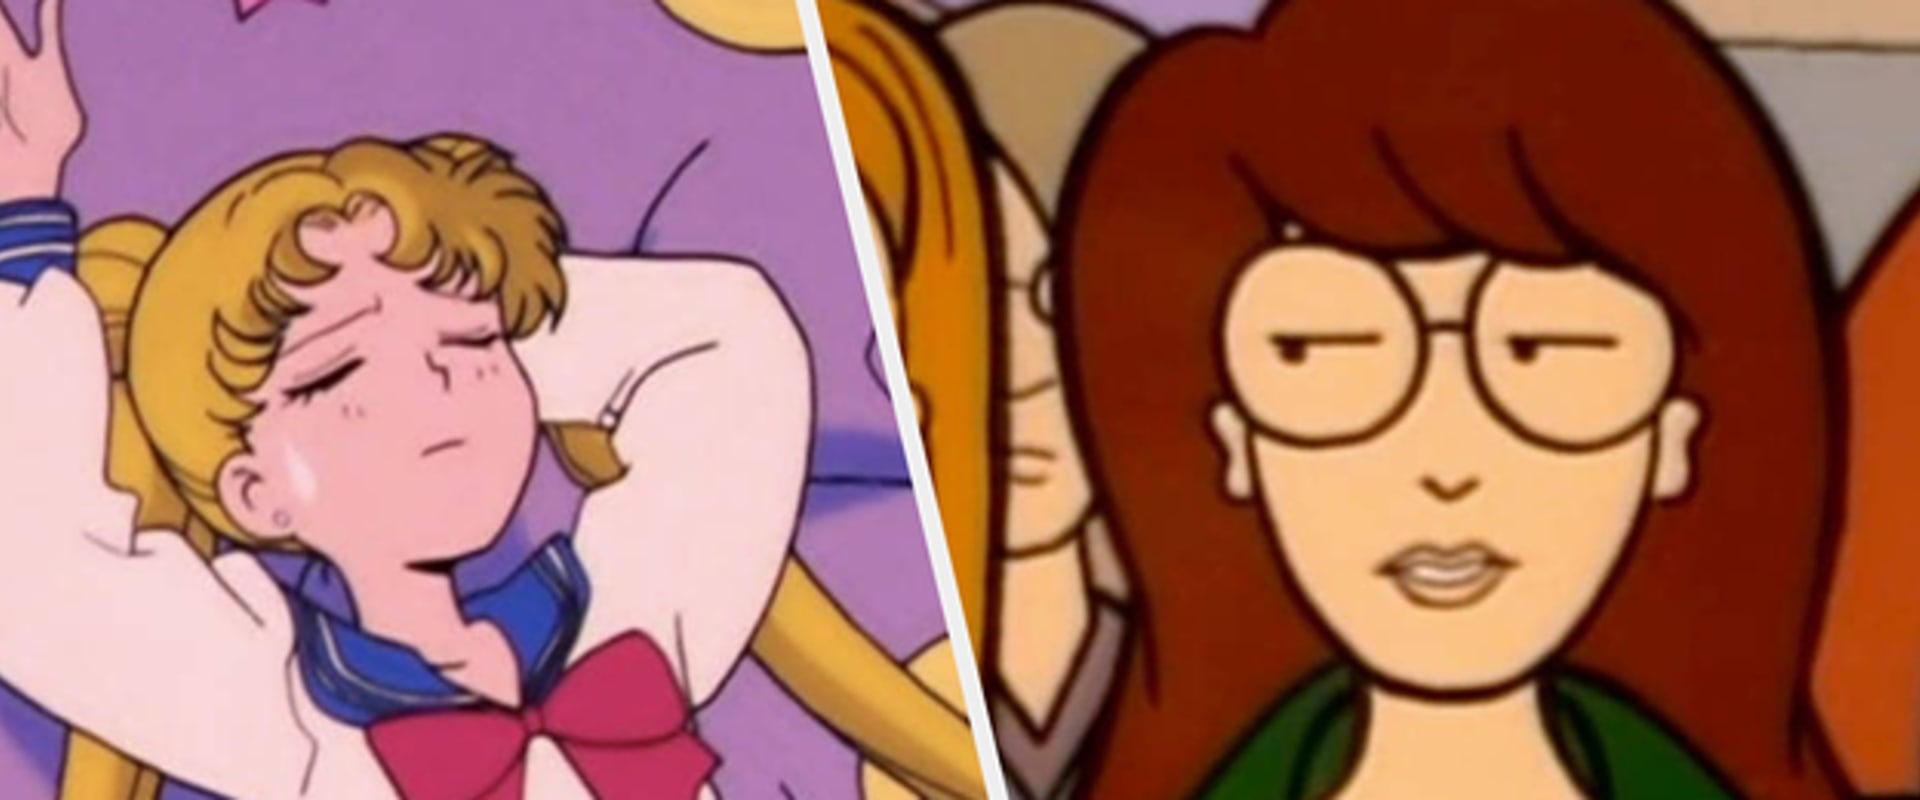 The Most Popular Cartoons of the 90s